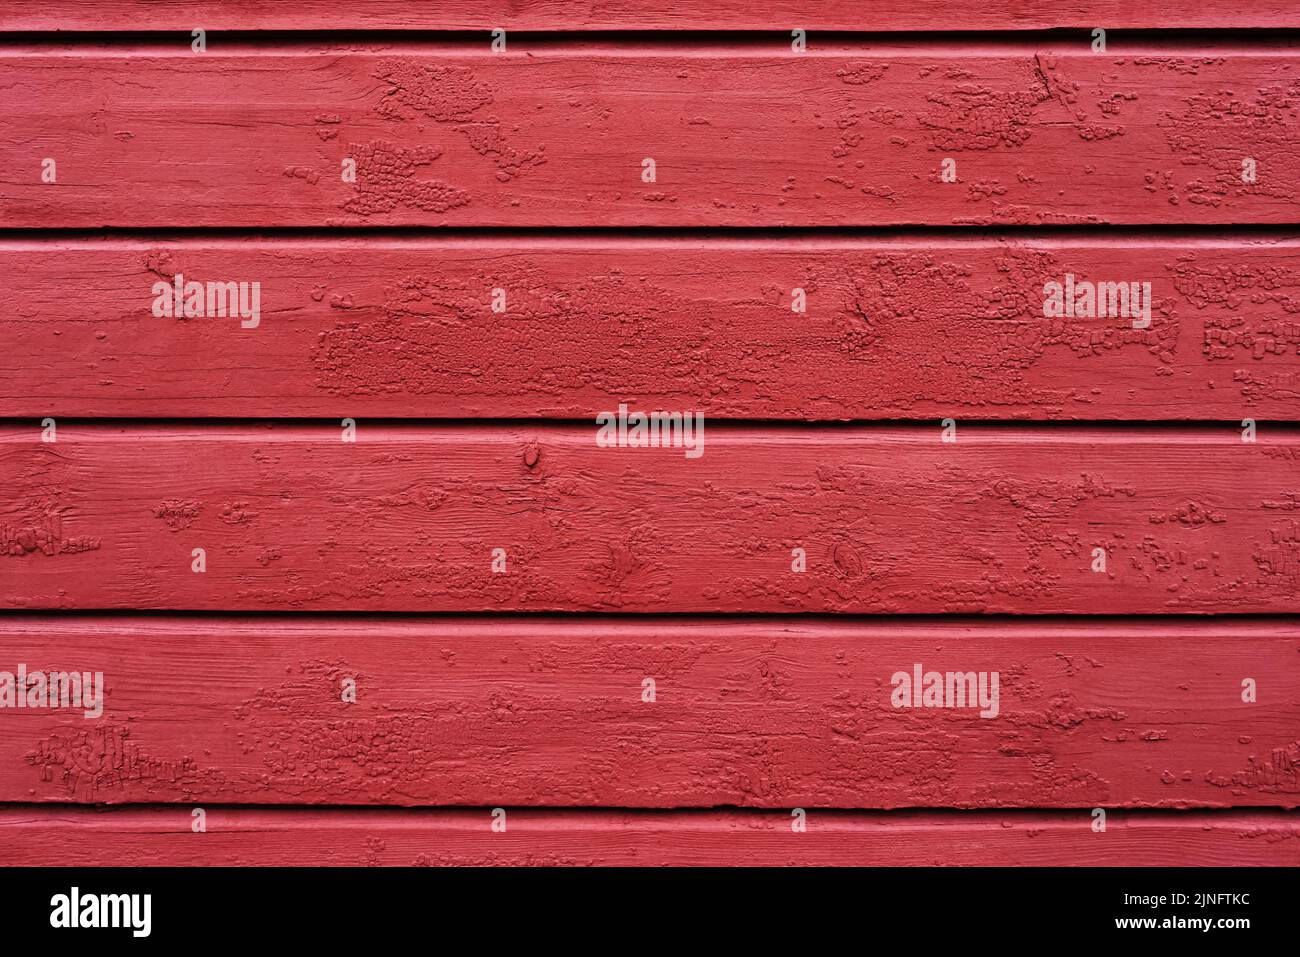 Bright red wooden background. Abstract background. Top view, copy space for text Stock Photo